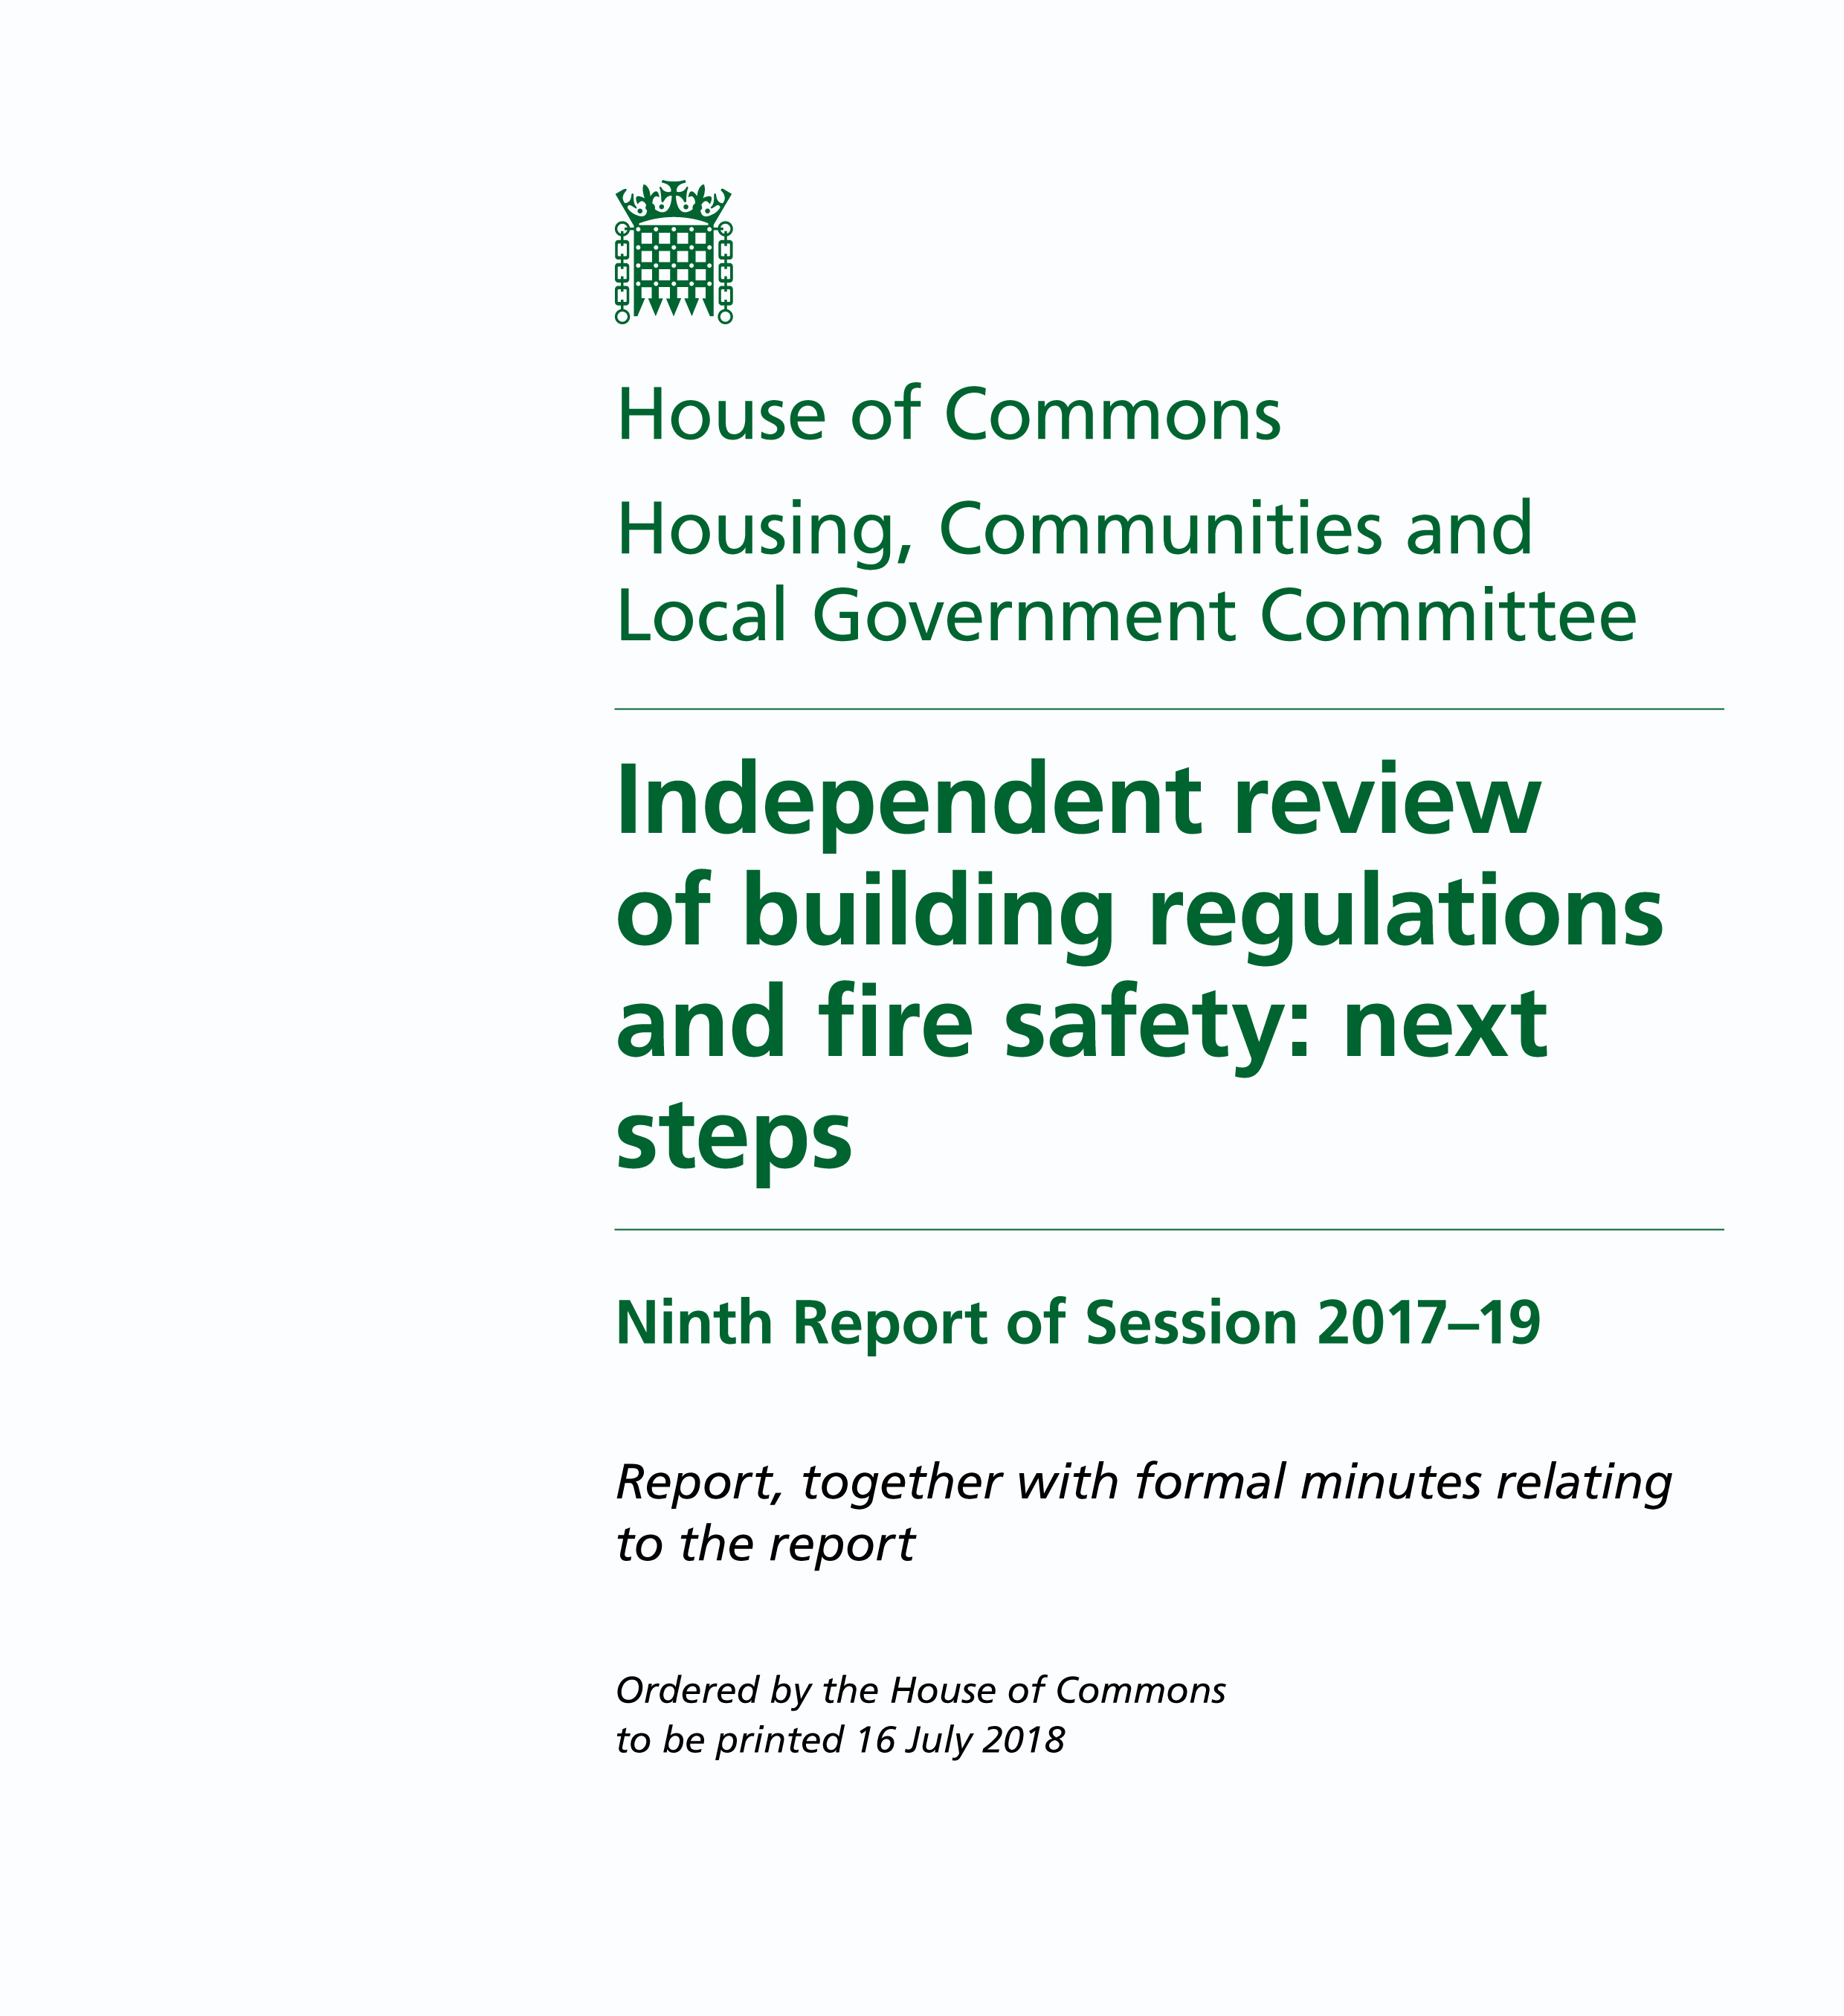 Government issues report on building regulations and fire safety